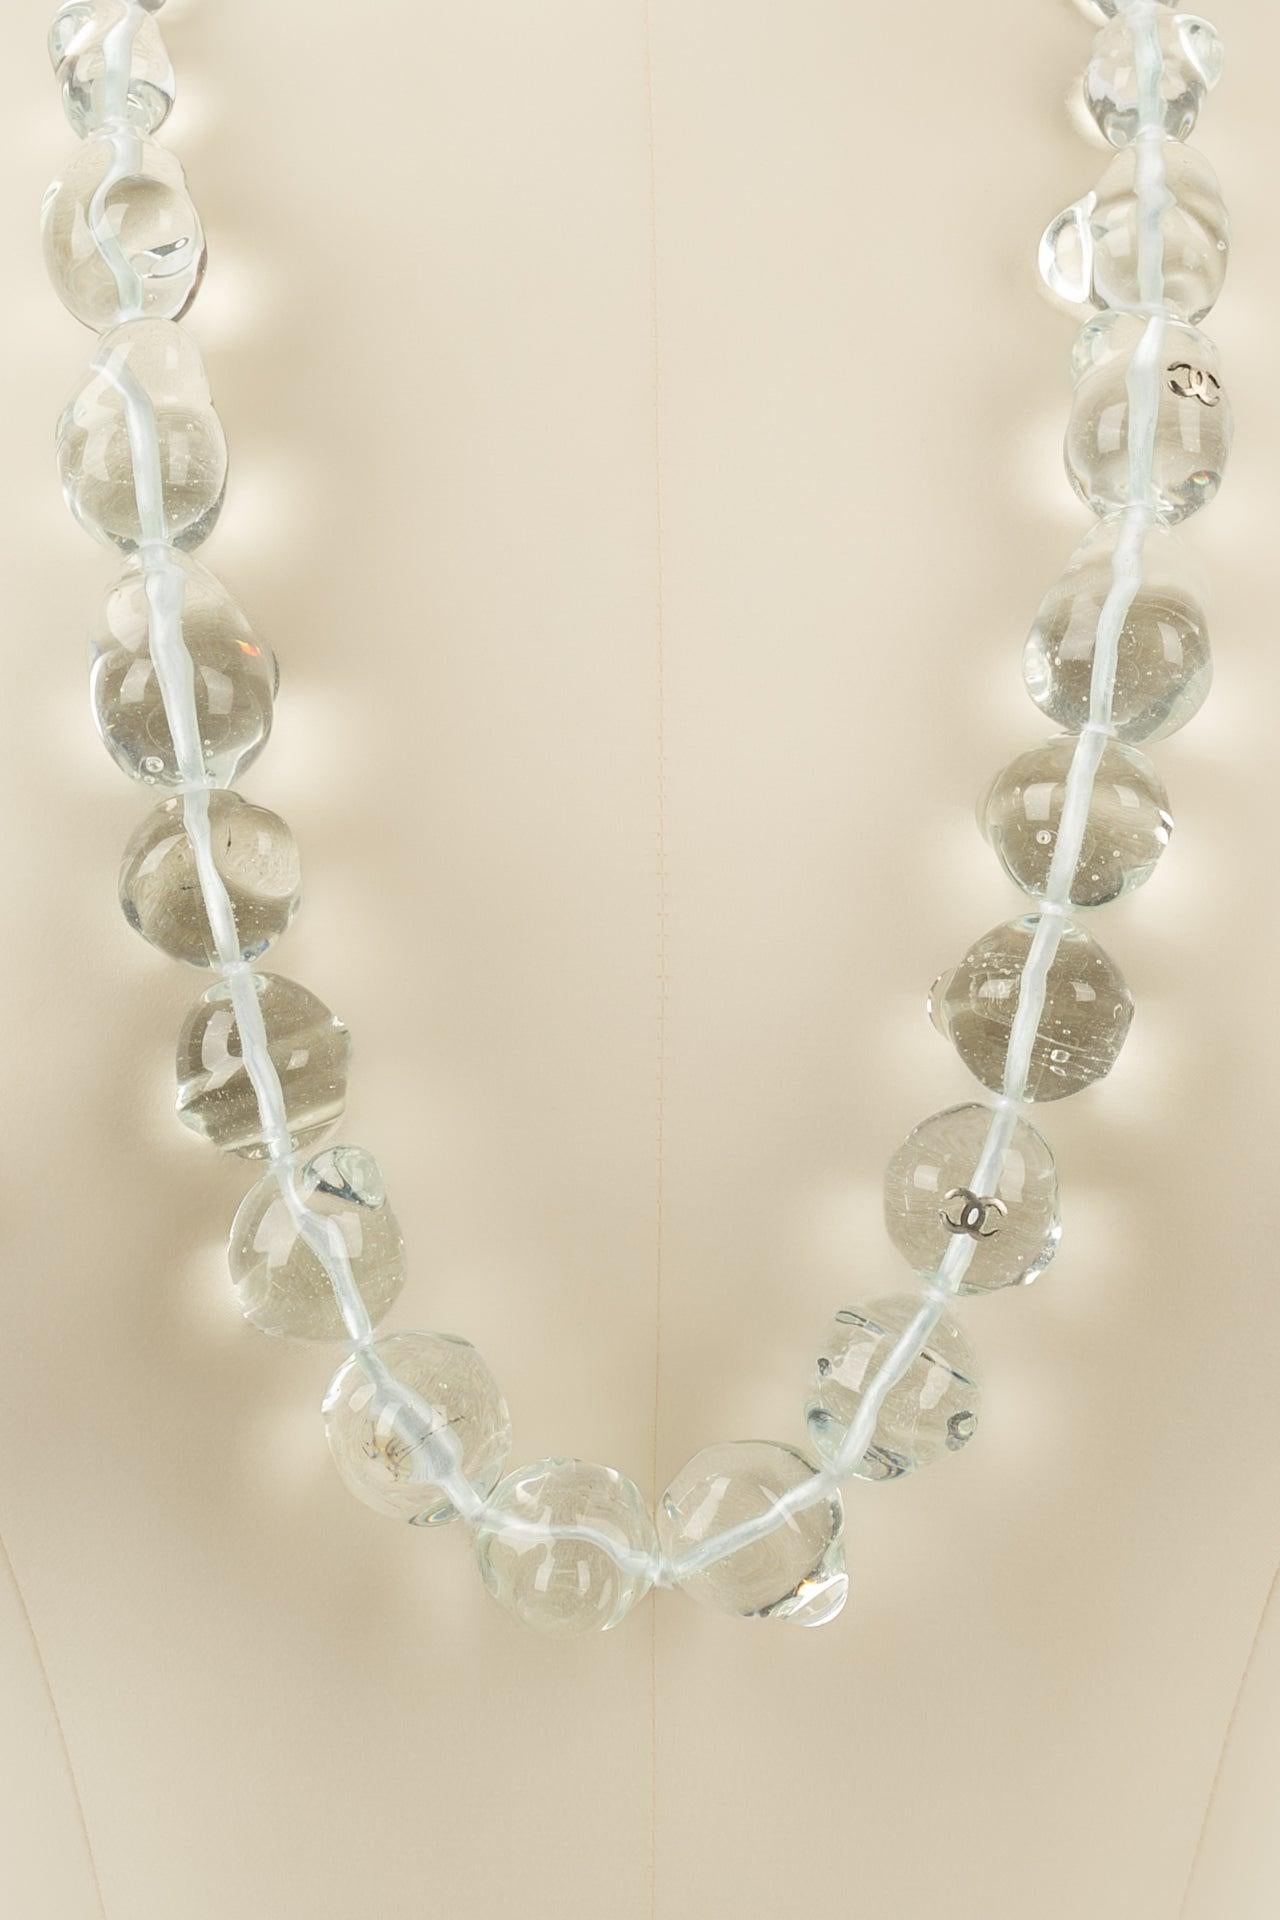 Chanel Necklace of Baroque Glass Beads, 1998 For Sale 3